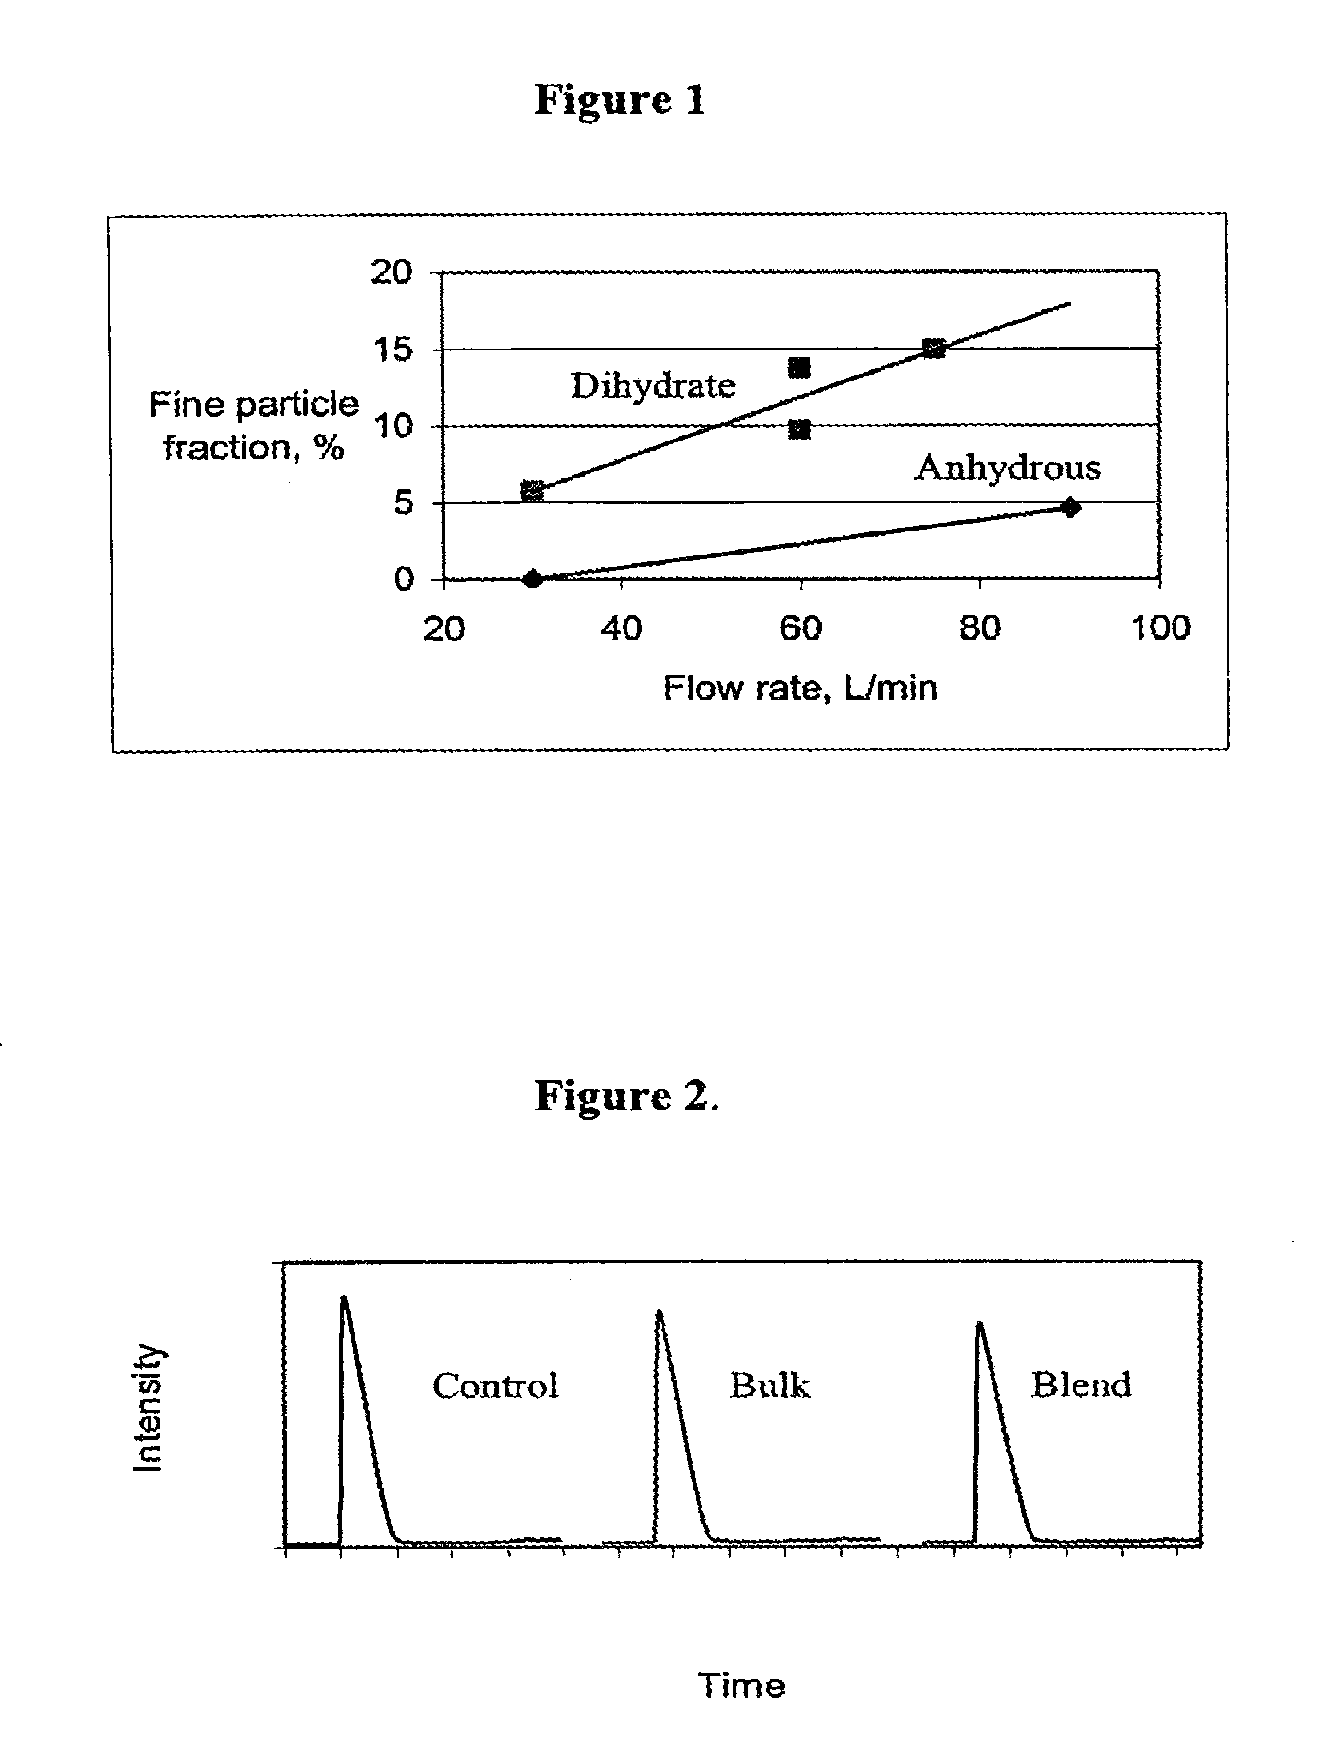 Dehydroepiandrosterone sulfate dihydrate inhalation compositions and methods